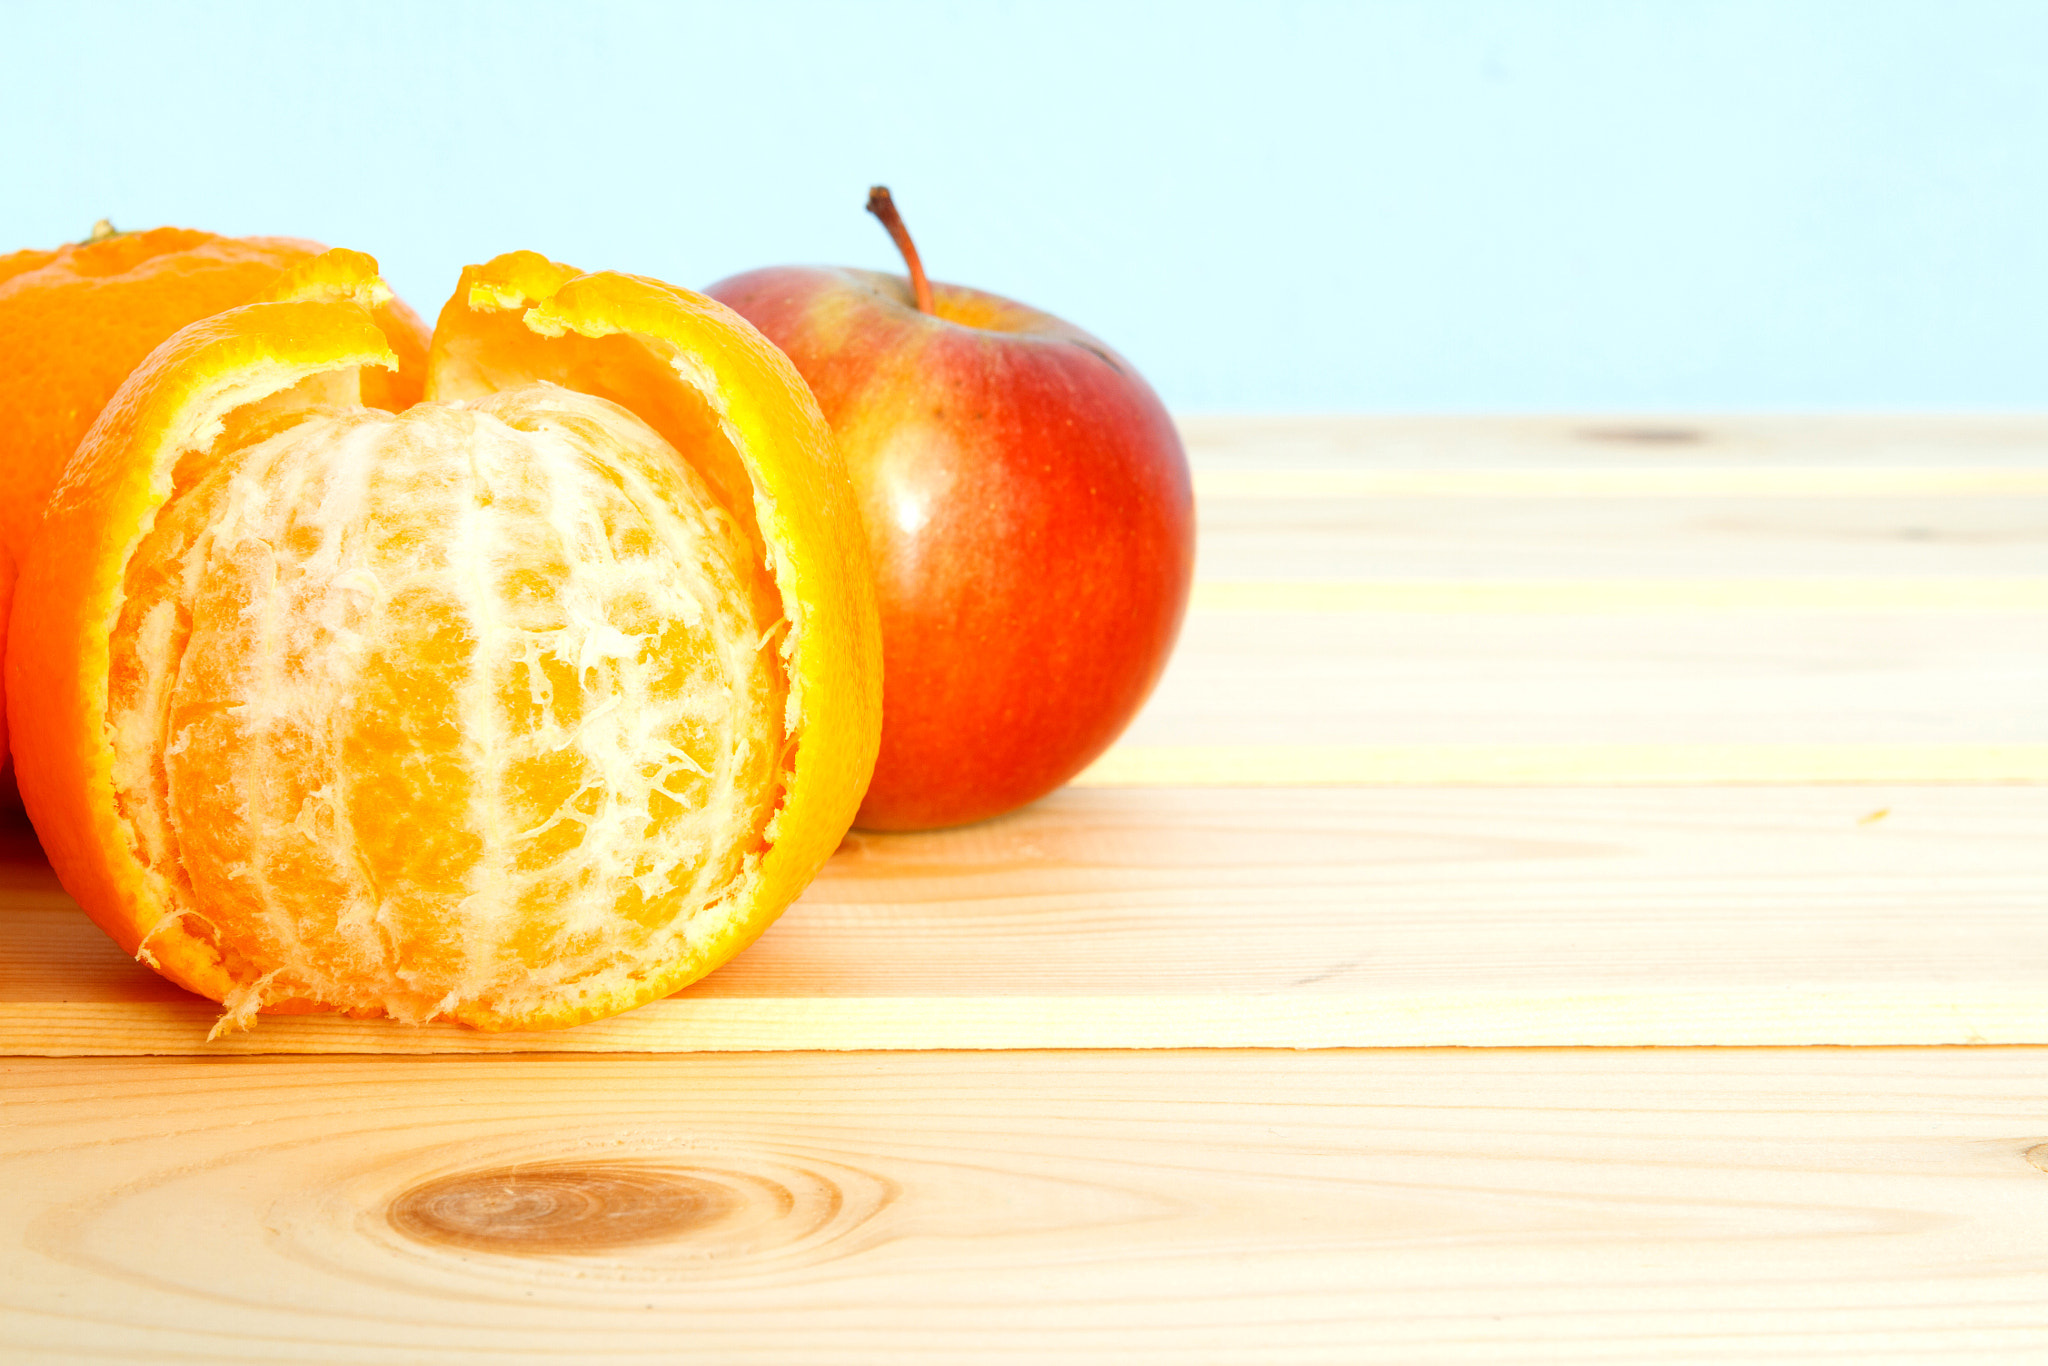 Canon EOS 7D + Canon TAMRON SP 17-50mm f/2.8 Di II VC B005 sample photo. Mandarins and apple on wooden table photography